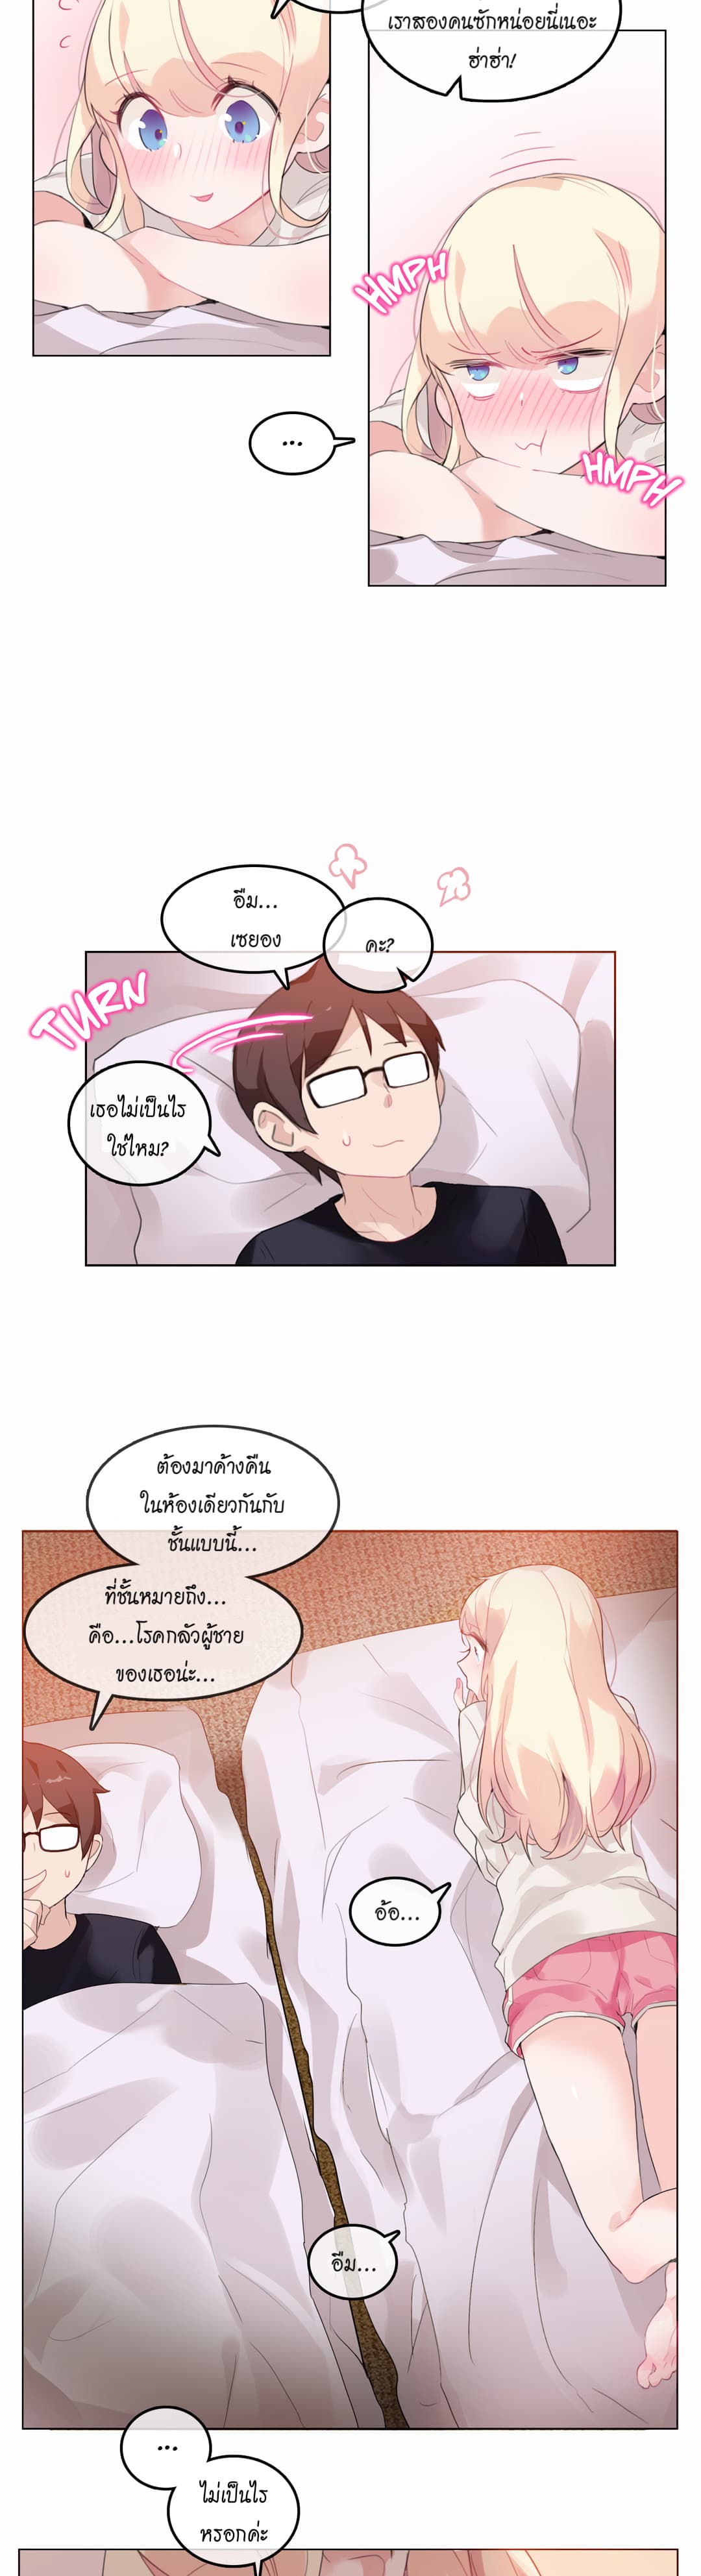 A Pervert’s Daily Life 21 (2)